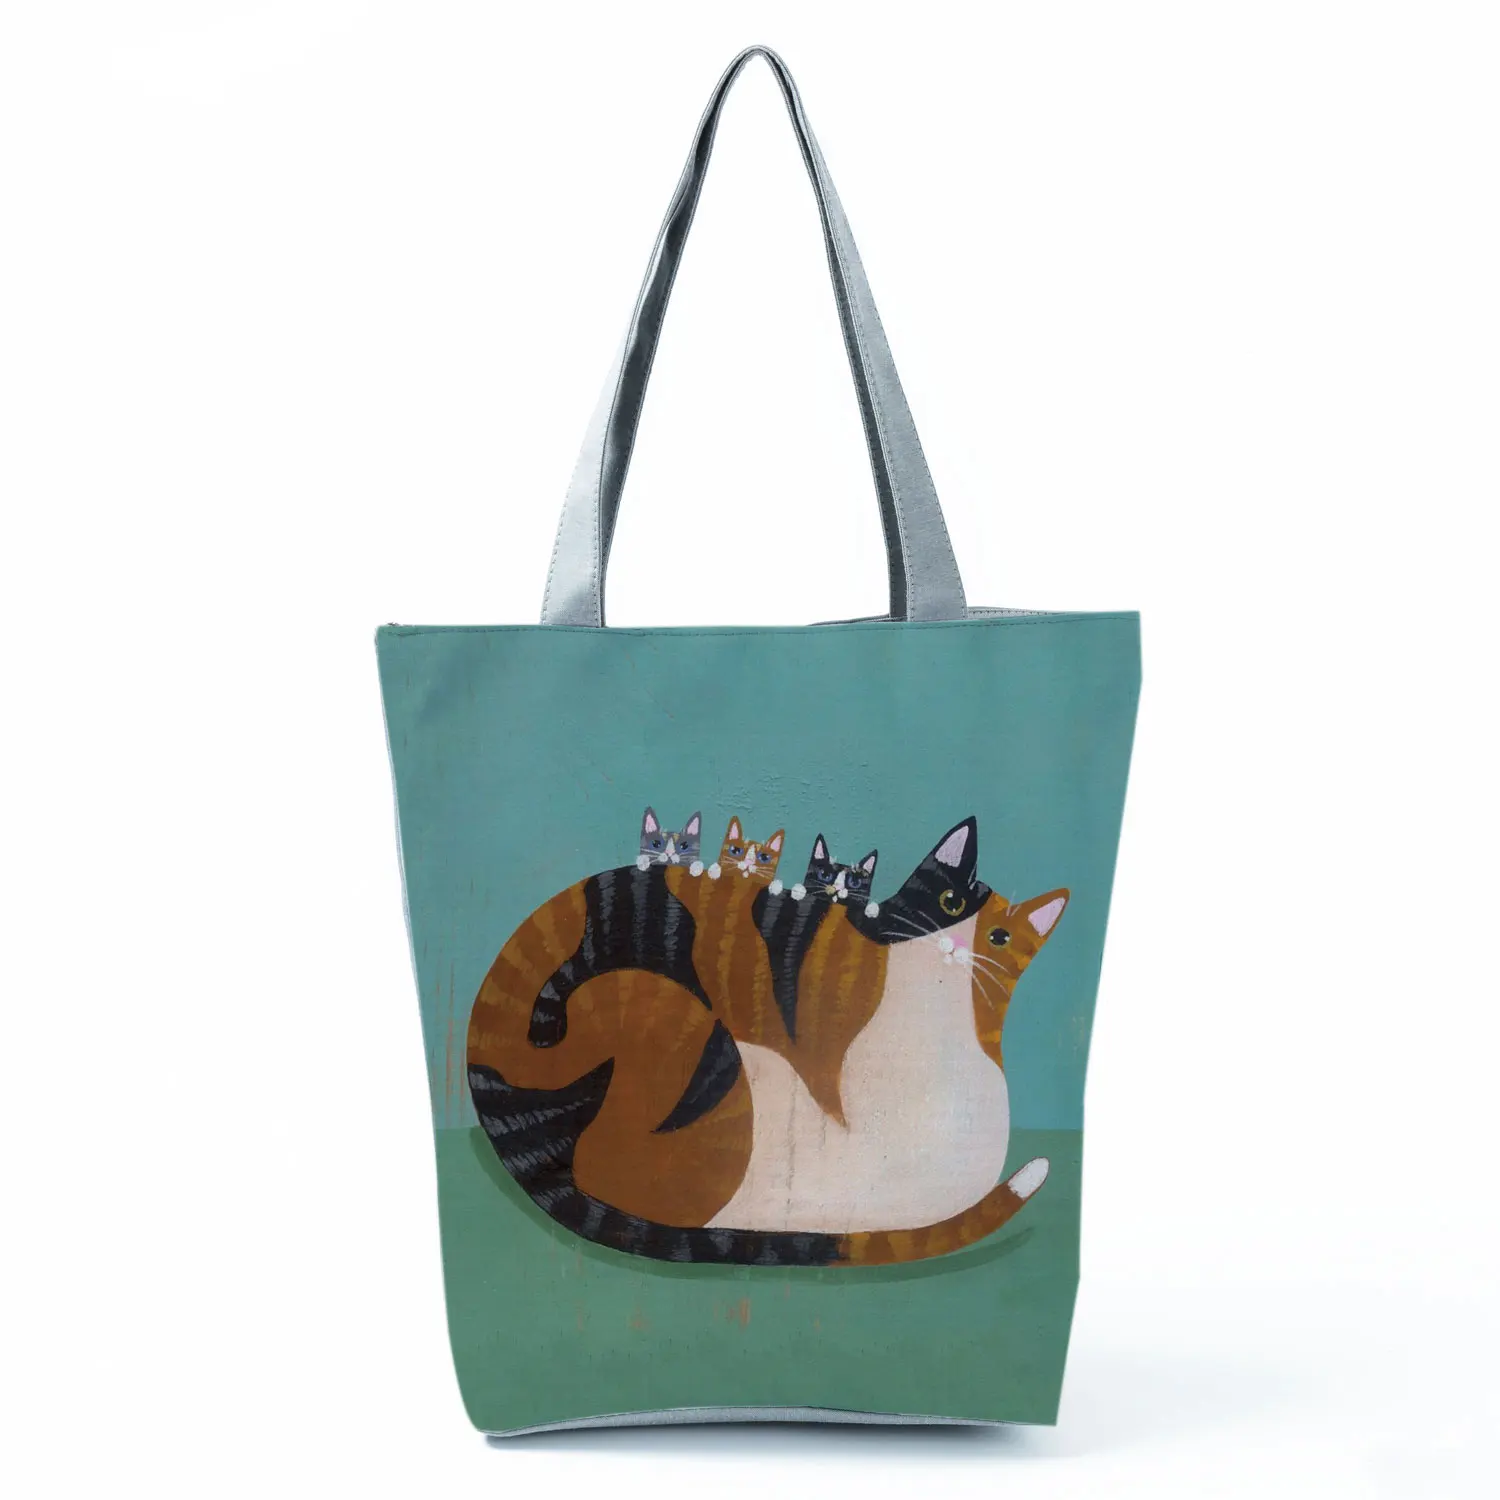 Customize Handbgas Cute Black I Love Cat Painting Women Designer Tote Animal Graphic Eco Reusable Shopping Shopper Bags Foldable women's bags brands	. Totes